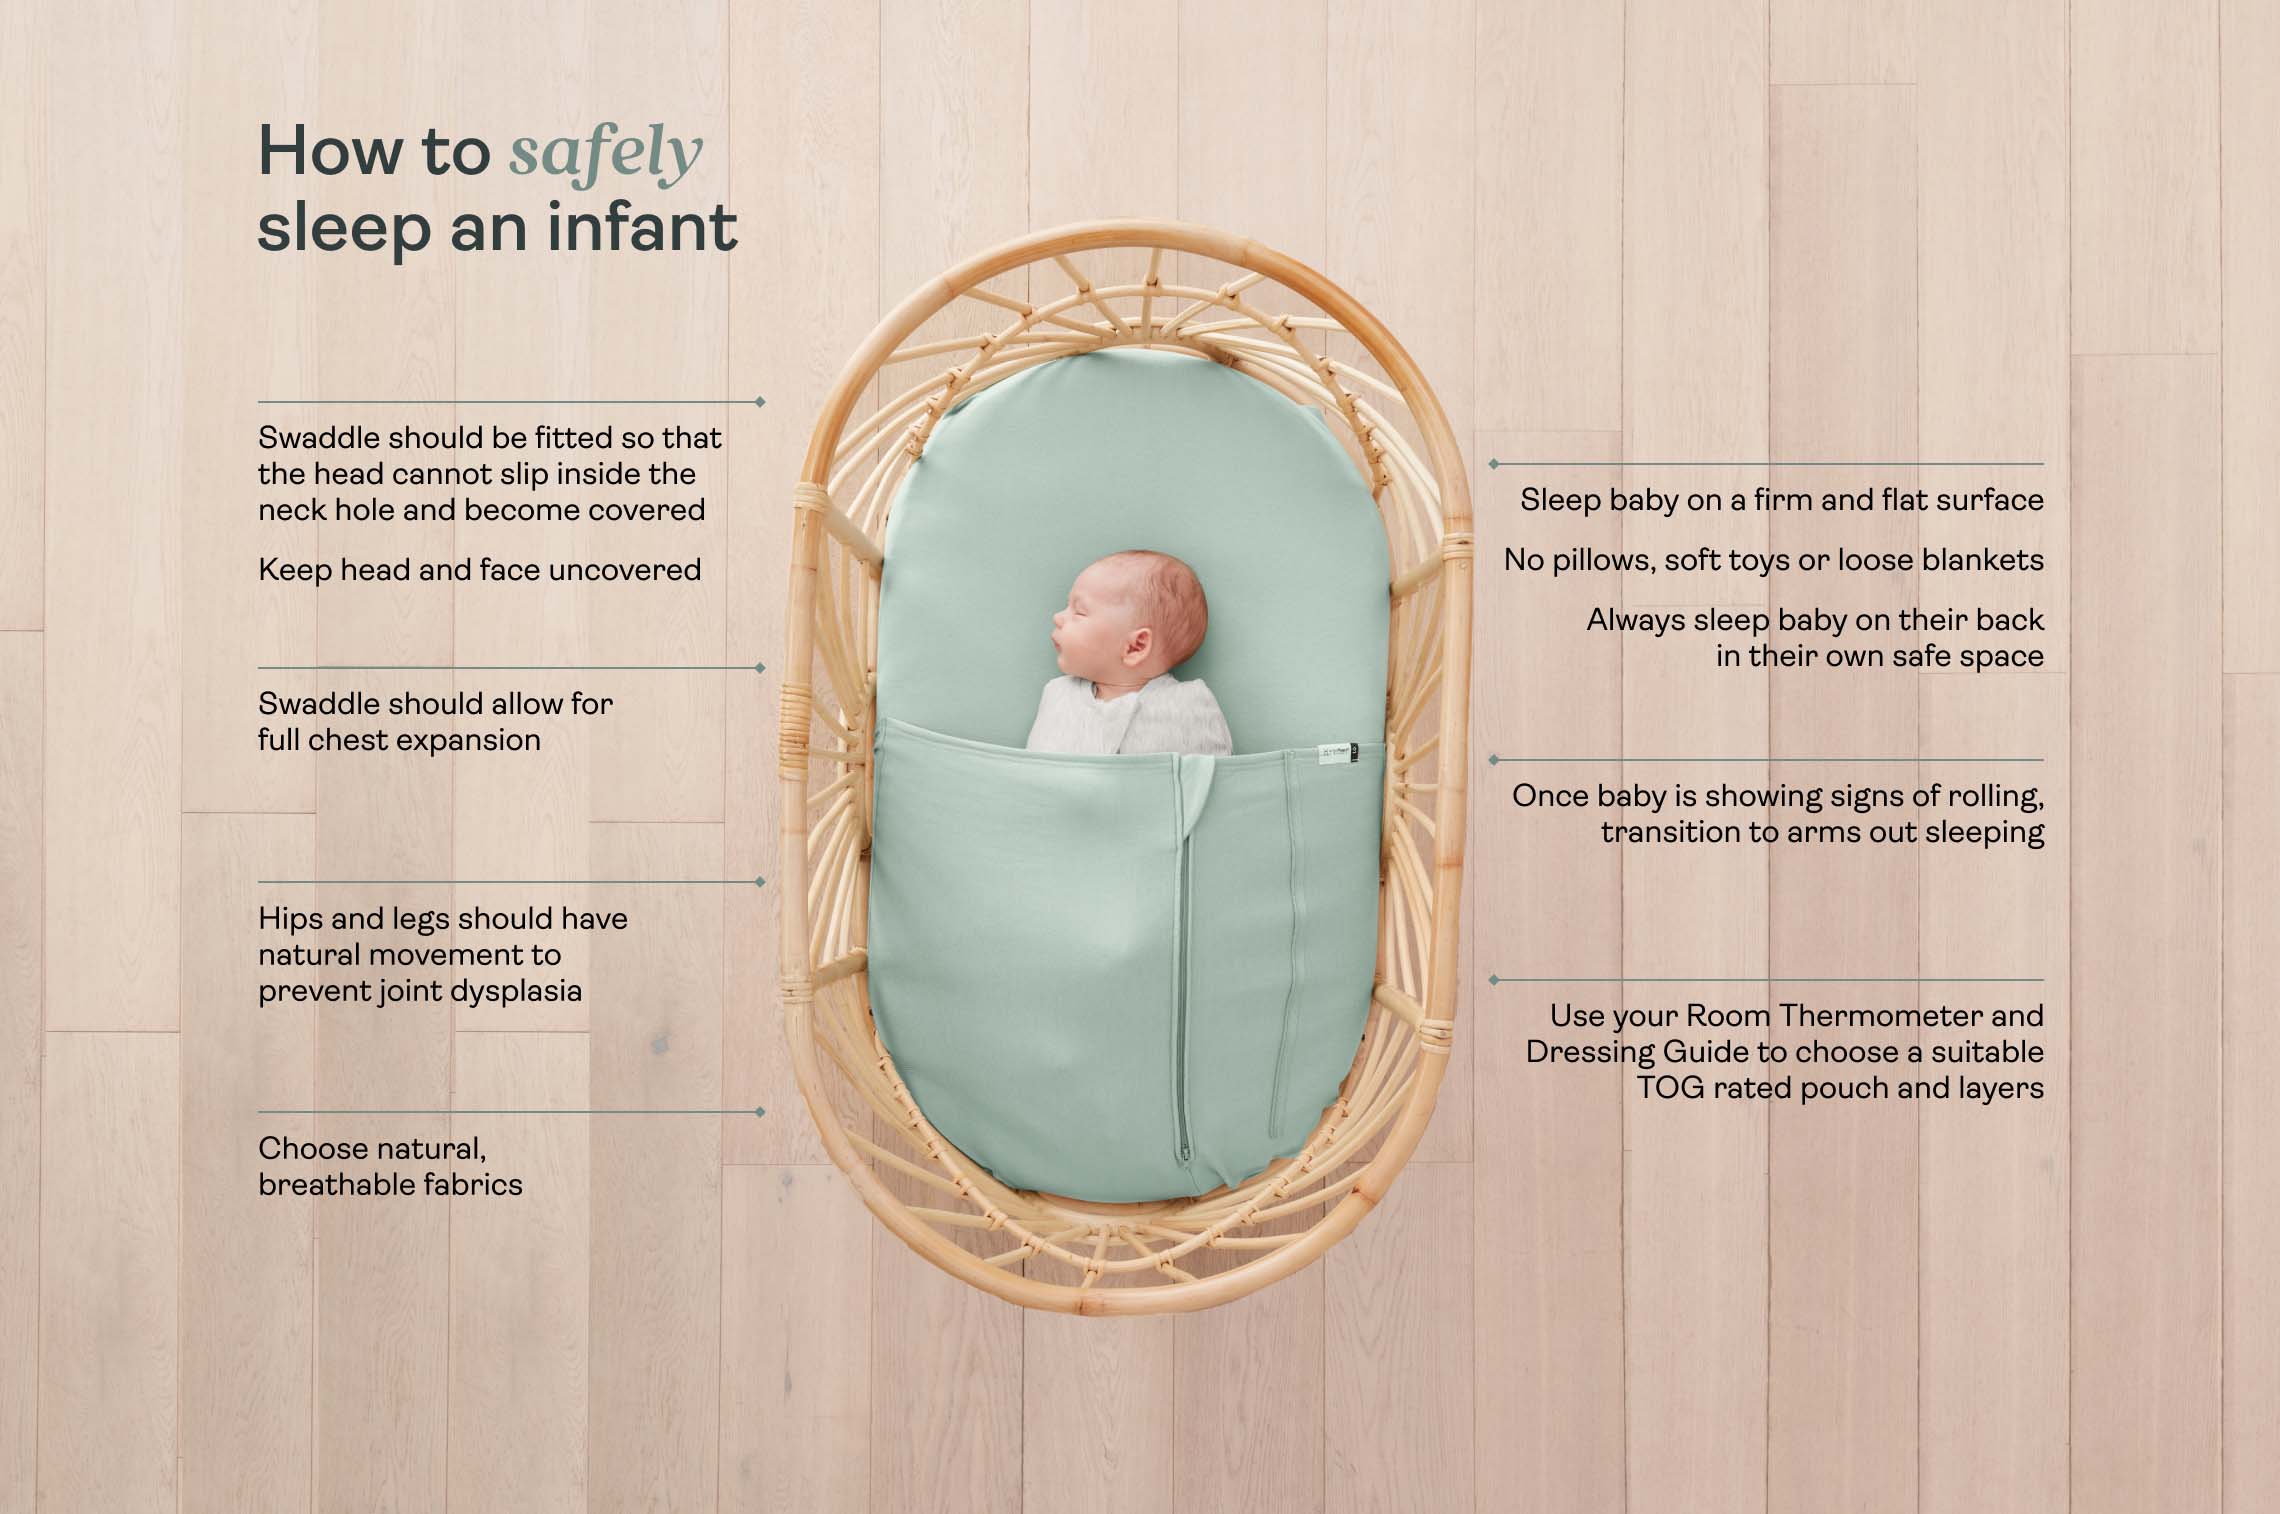 Tips for how to safely sleep an infant